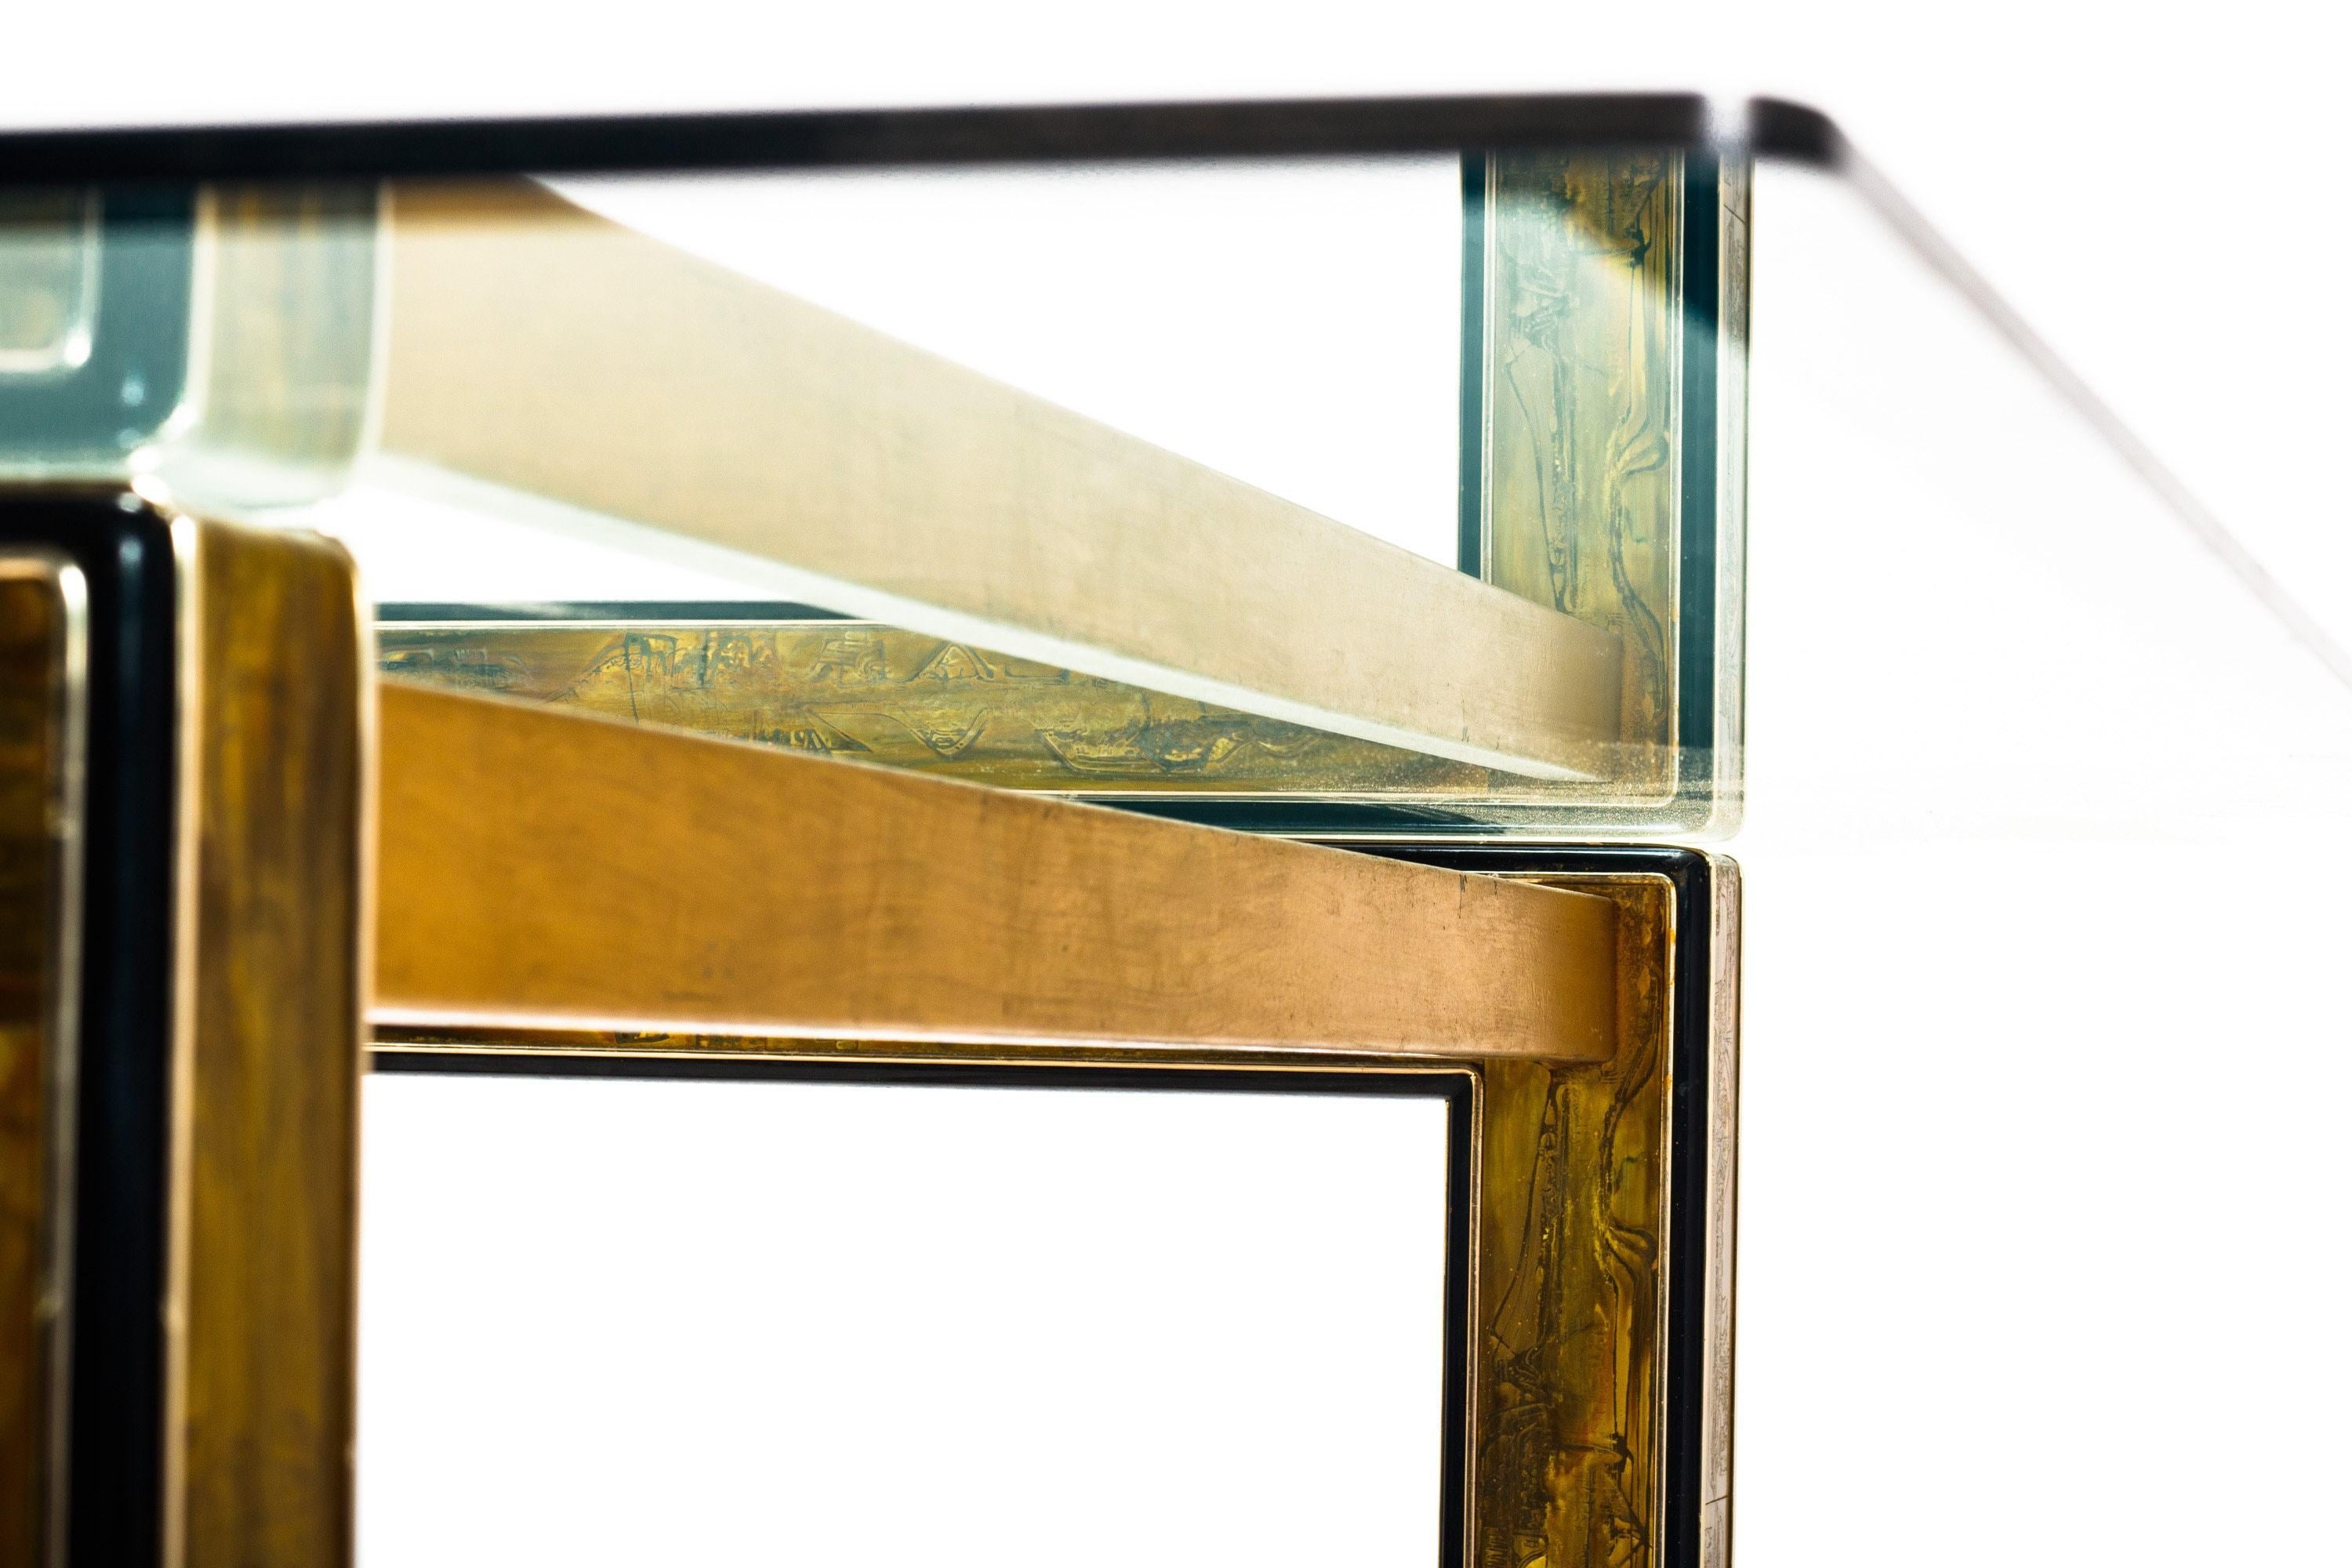 What makes this midcentury dining table exquisite is the synergy of Bernhard Rhone's Art and the Mastercraft construction. Brutalist midcentury Artist, Bernhard Rhone – and his metal acid etched brass technique – created one of a kind panels that